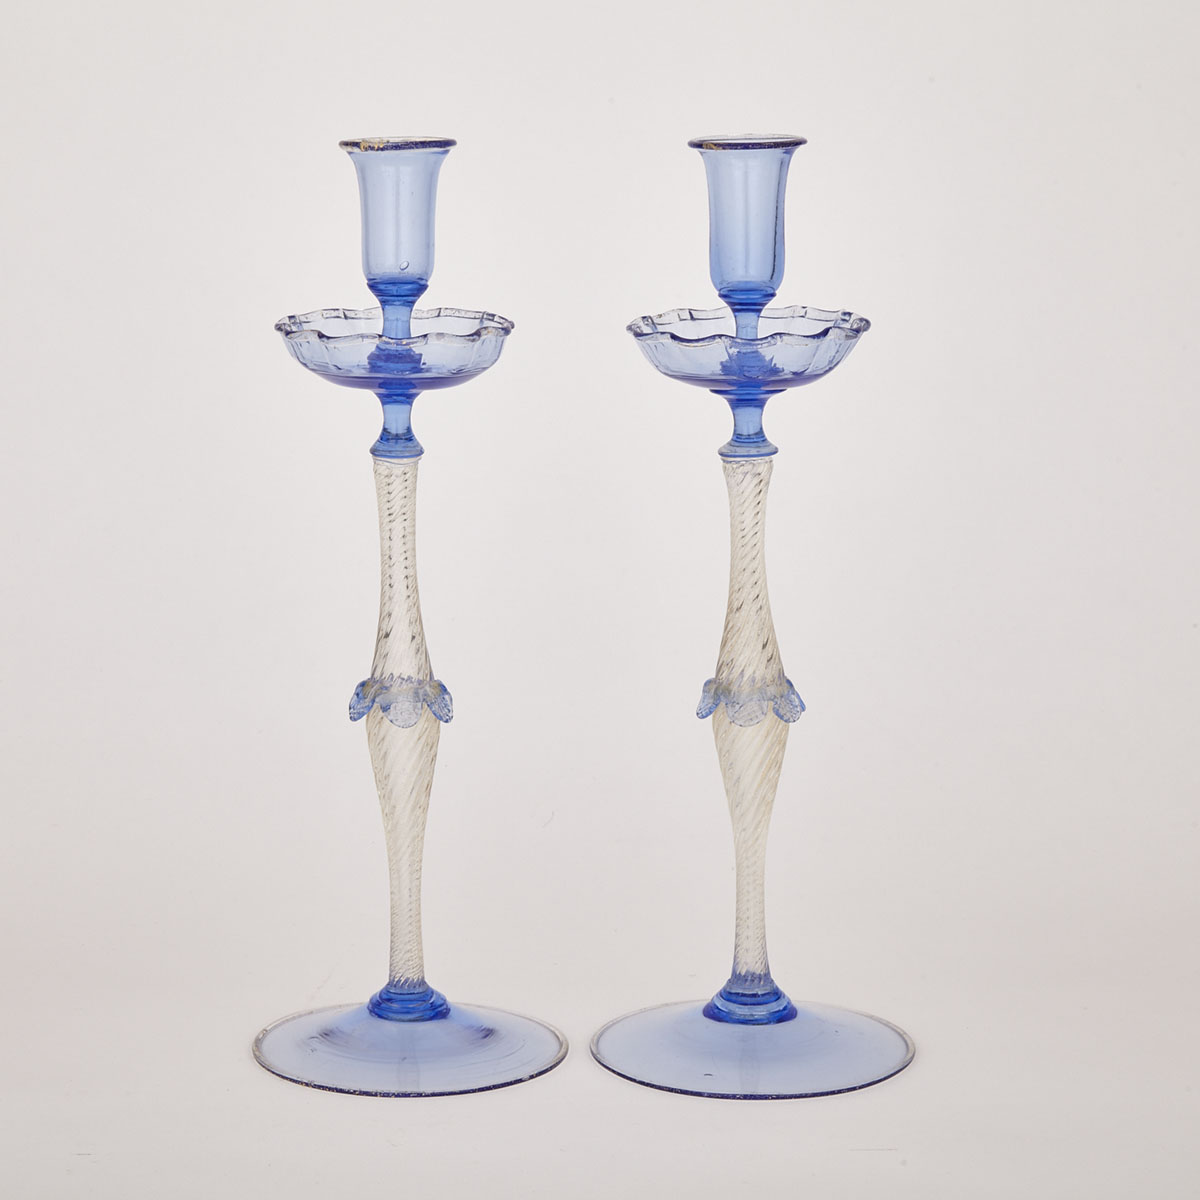 Pair of Tall Murano Glass Candlesticks, early-mid 20th century